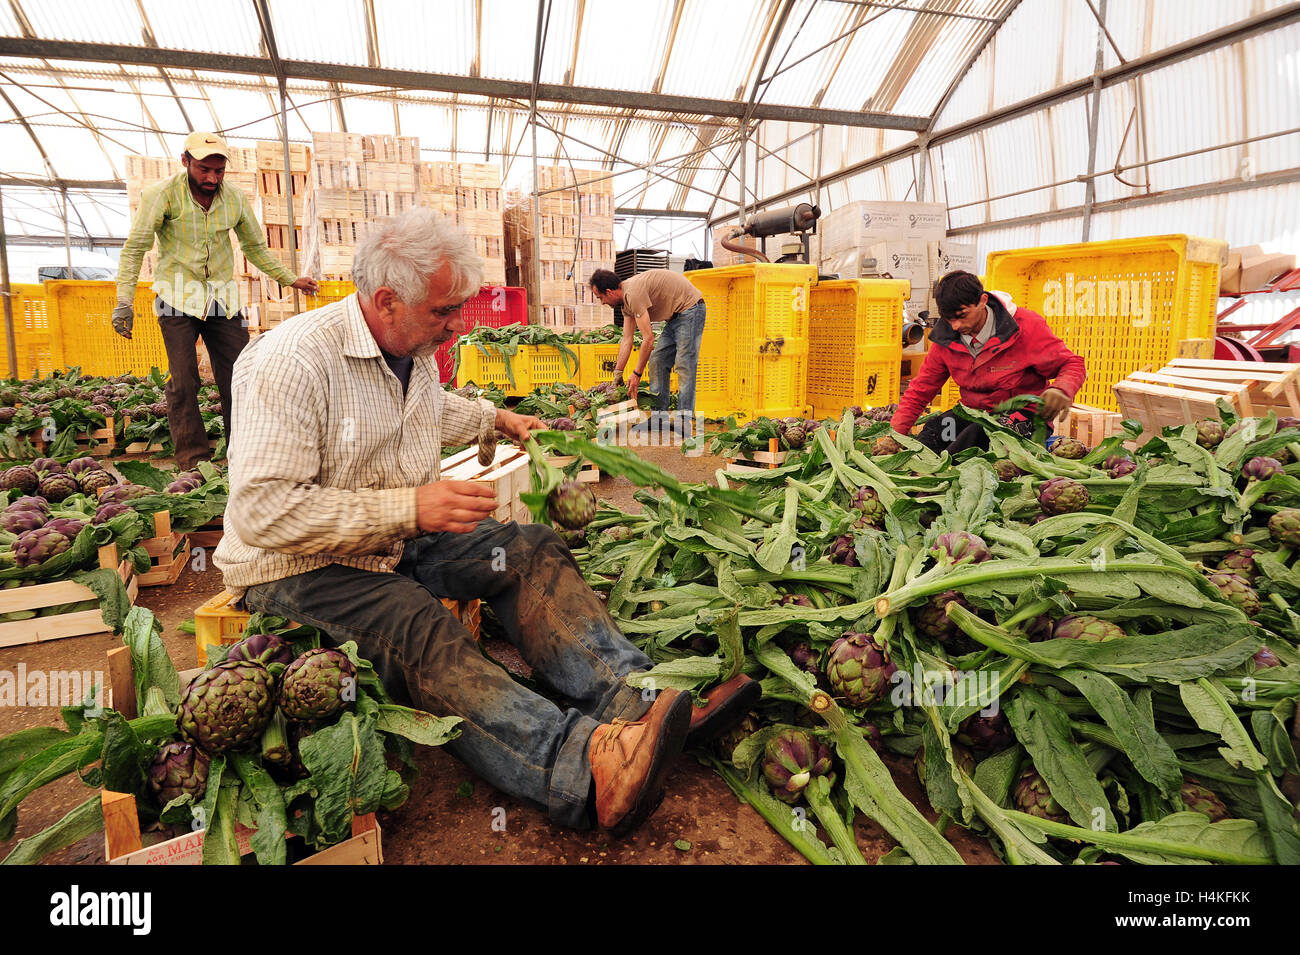 Workers prepare Roman artichokes for packing and shipping at a processing facility in Ladispoli, Italy. Stock Photo